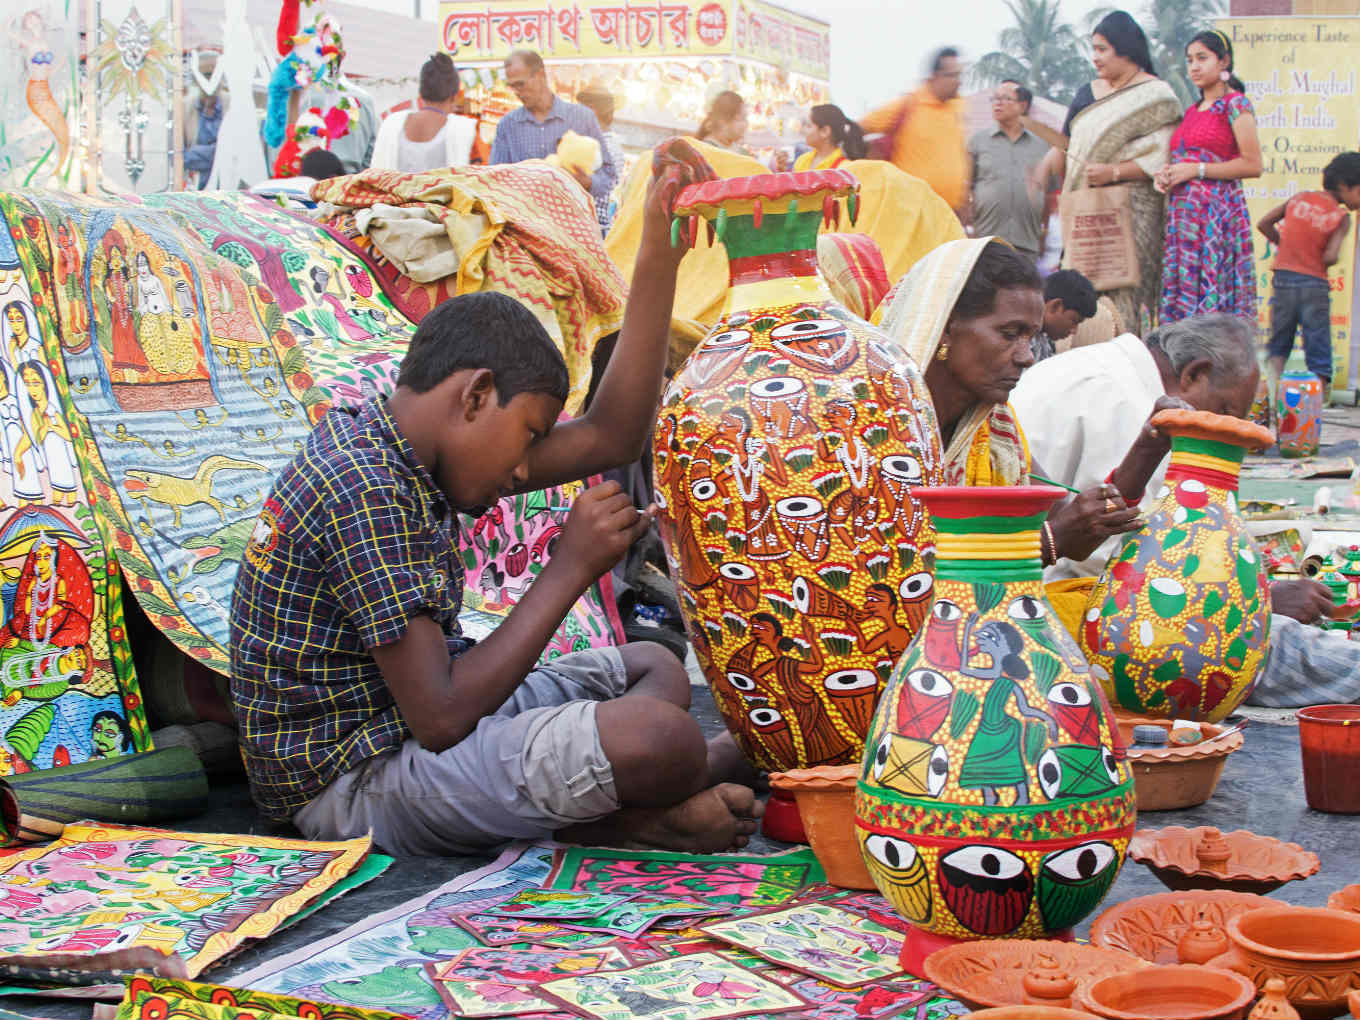 Amazon Announces The Launch Of "Amazon Karigar" For Indian Artisans